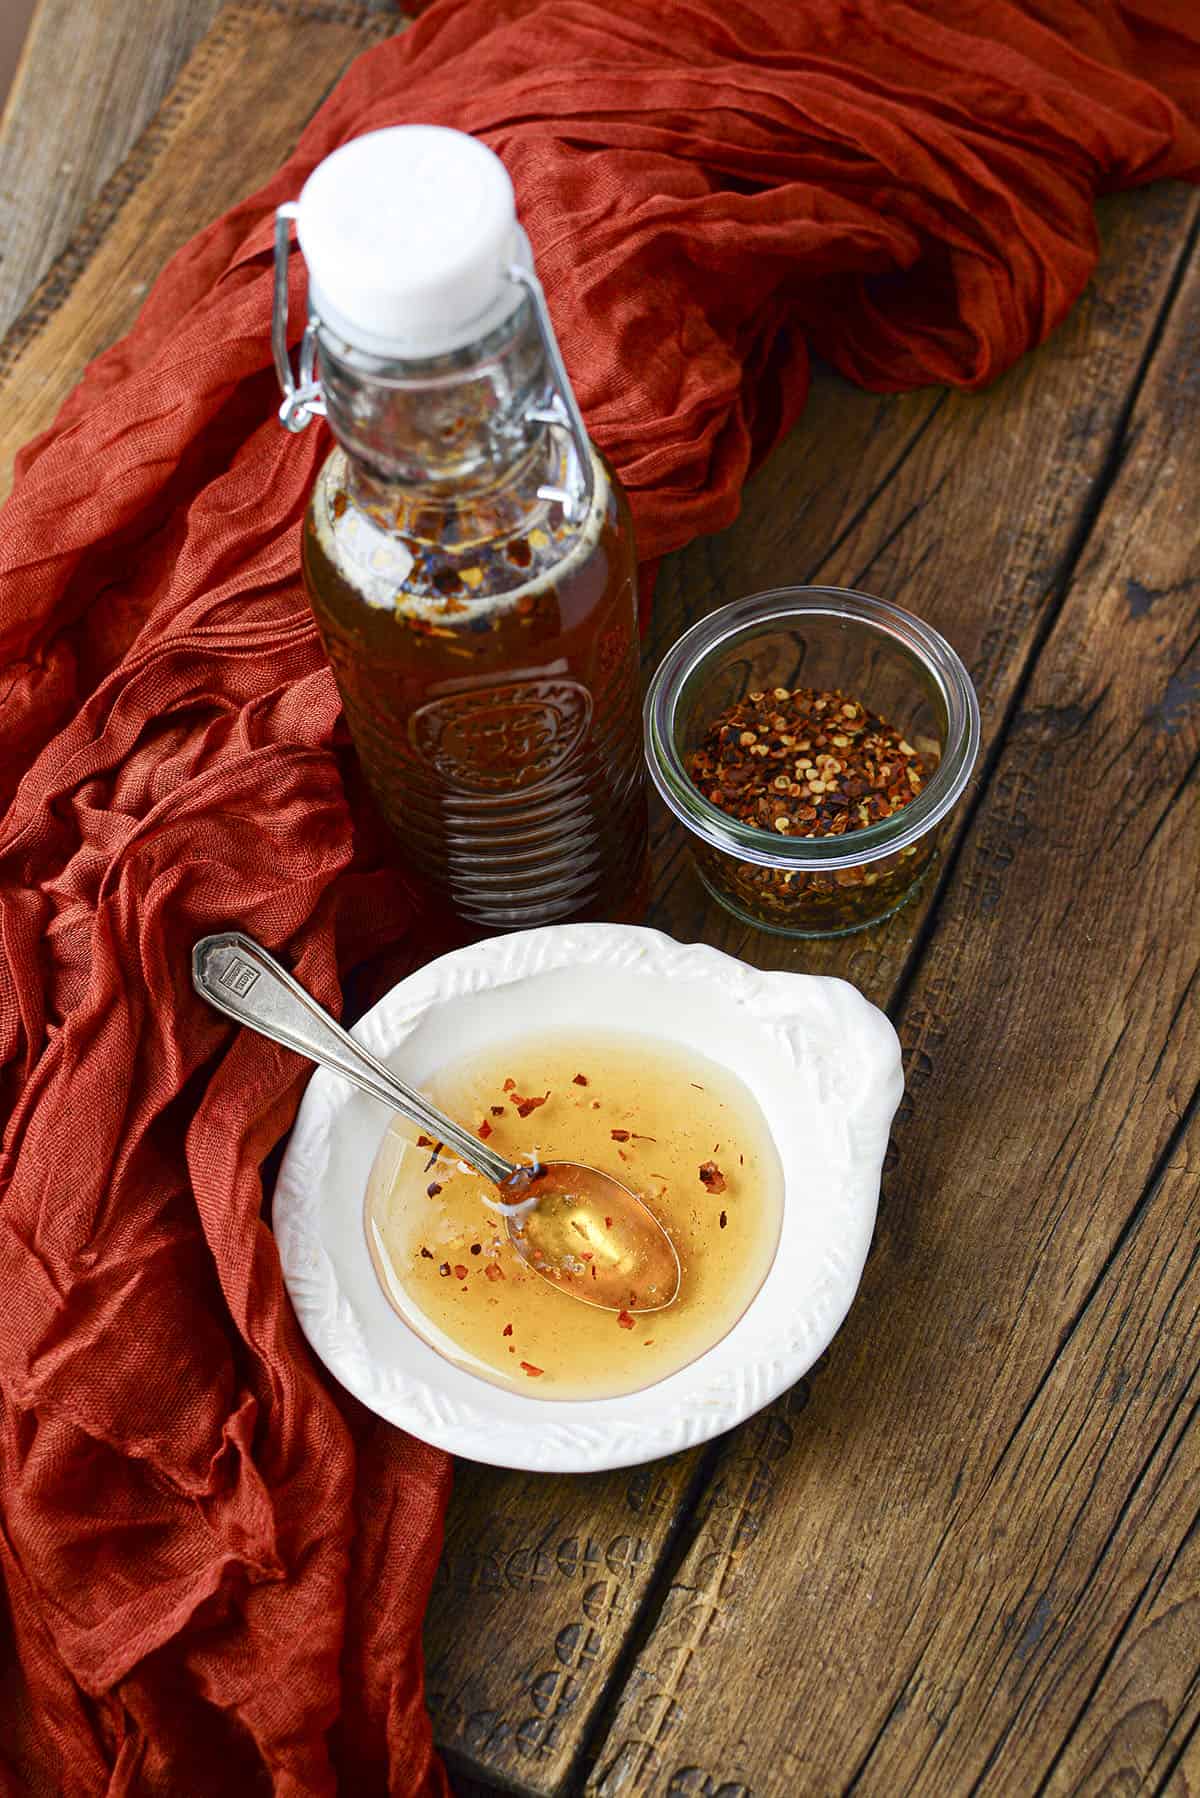 A rustic cloth lays on the left beside the bottle and small bowl of hot honey.